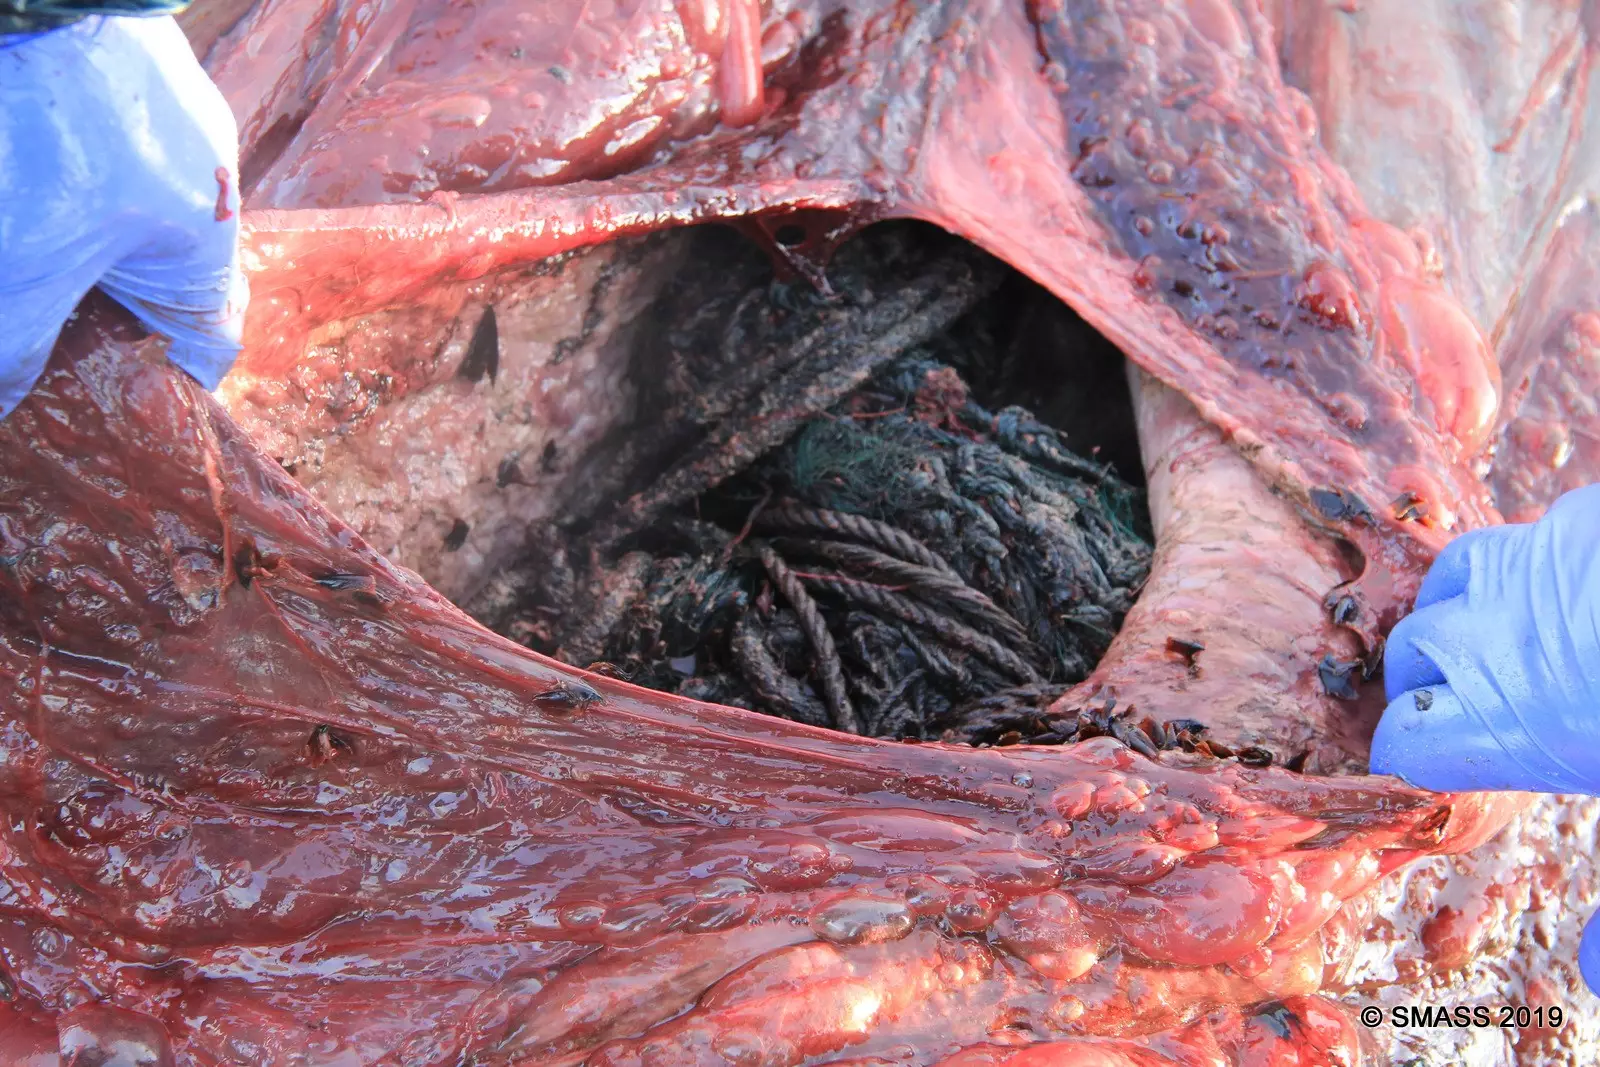 Marine biologists cut open the dead whale to find its stomach was packed with rubbish.